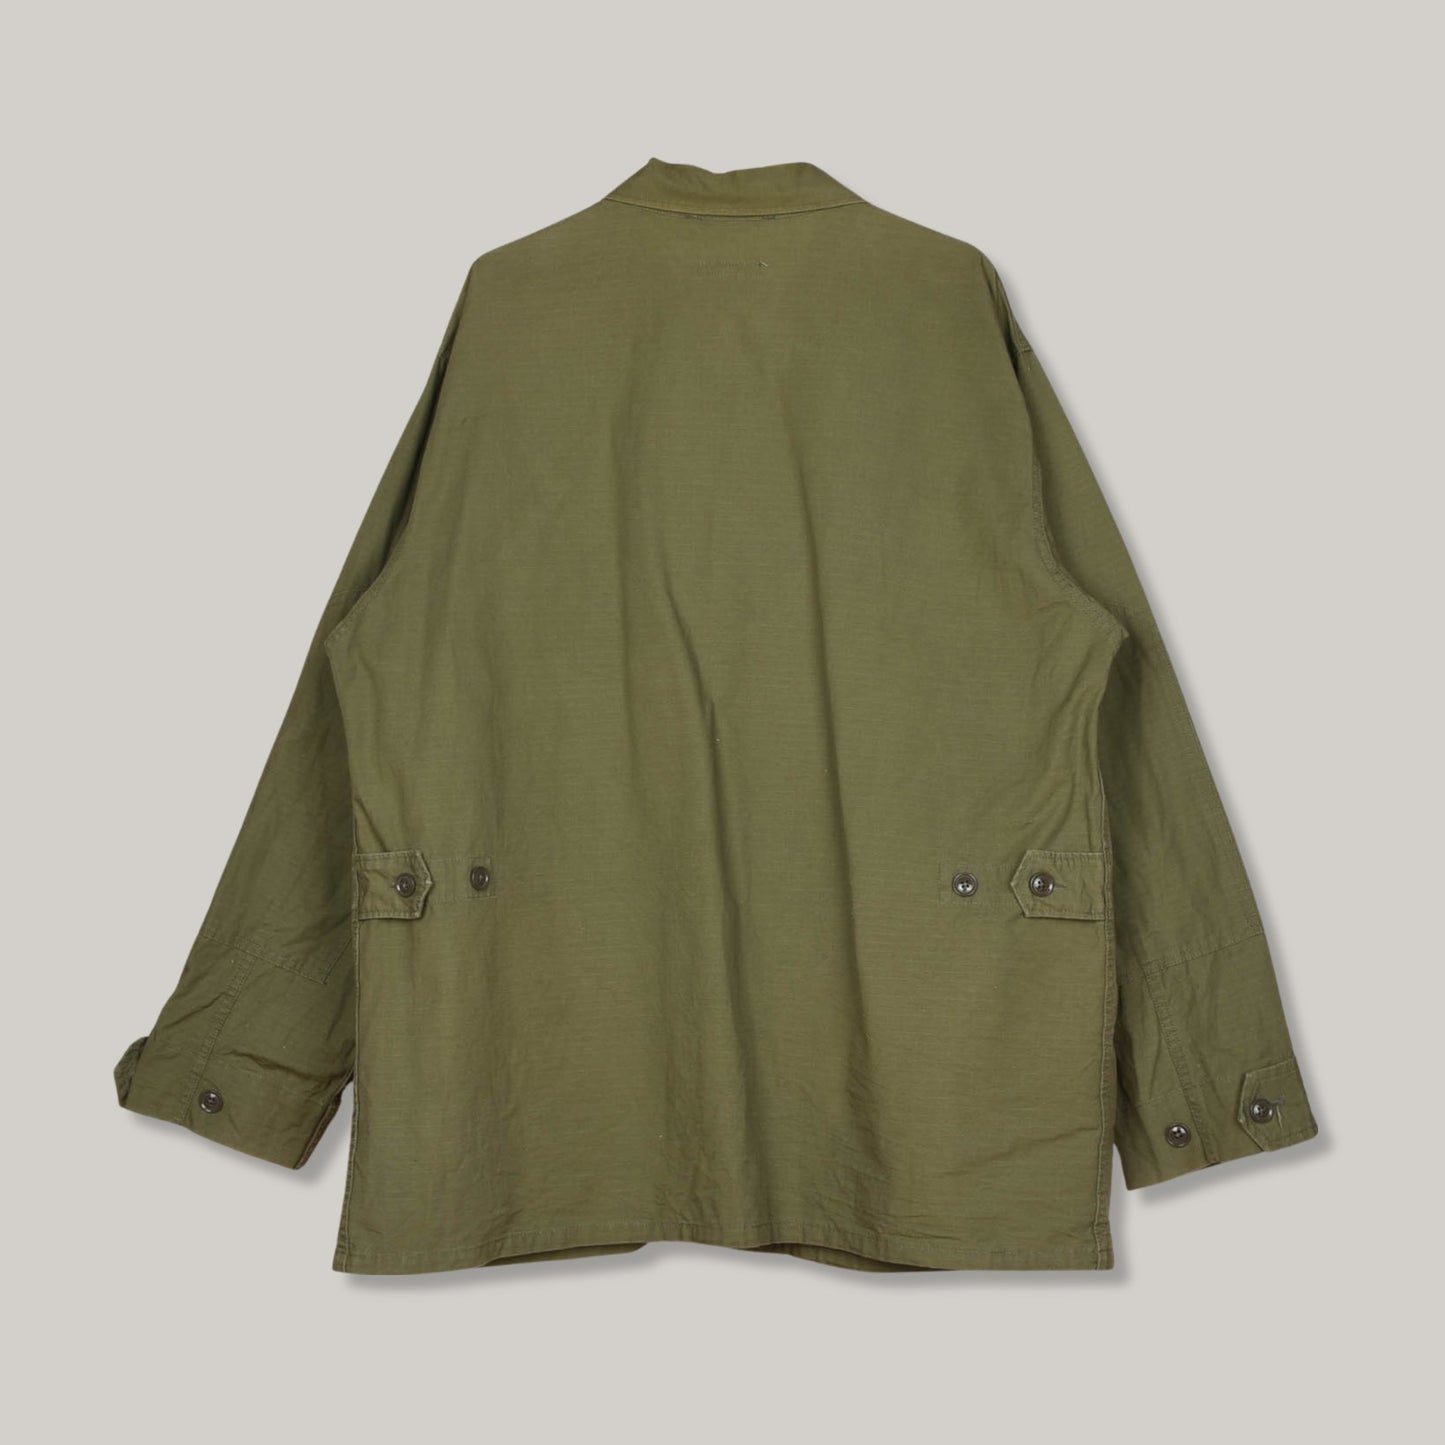 USED ENGINEERED GARMENTS MILITARY FIELD JACKET -  FADED GREEN RIPSTOP